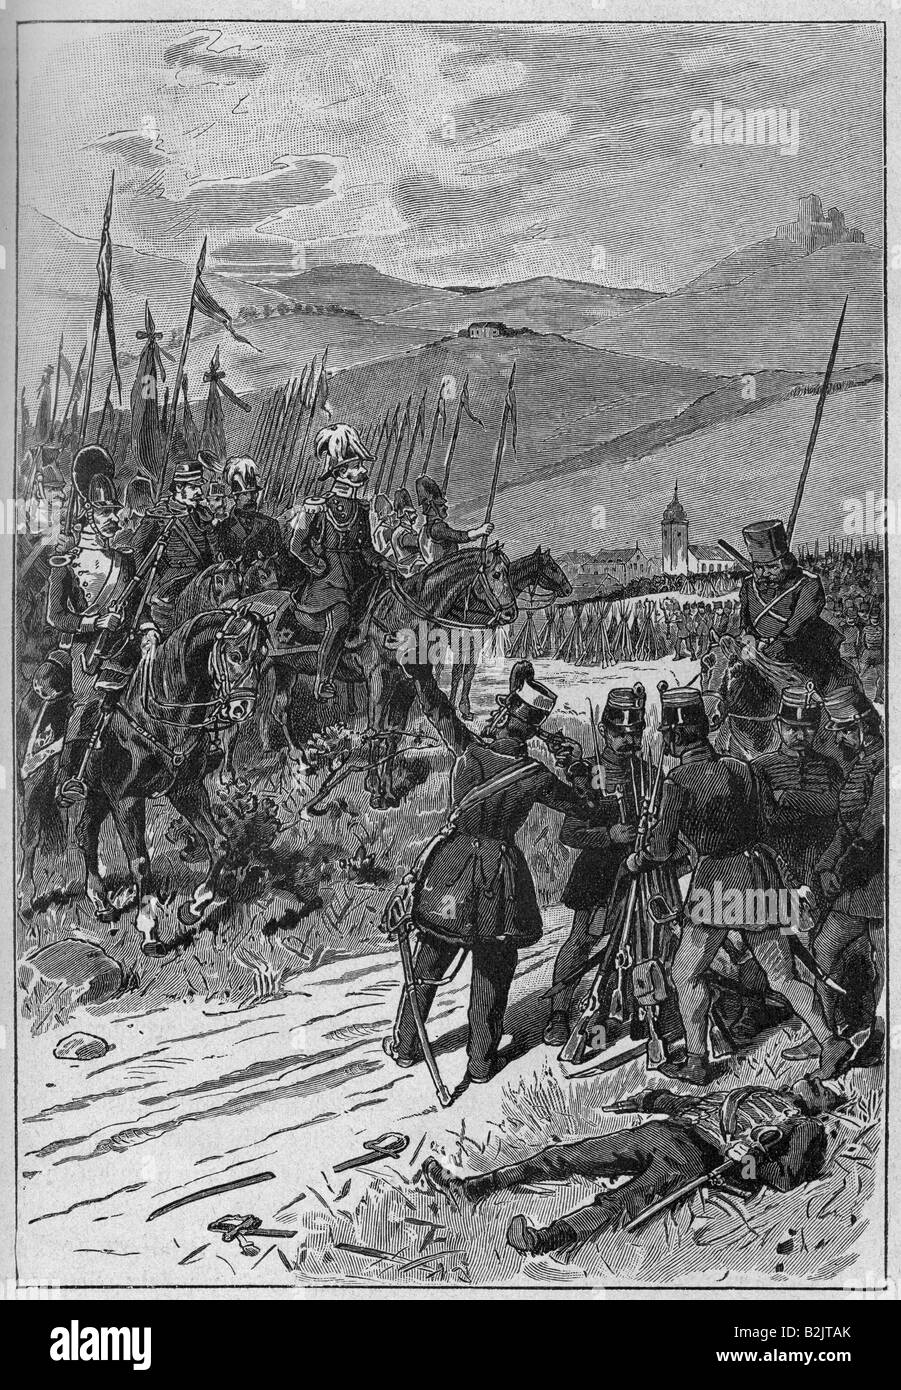 events, revolutions 1848 - 1849, Germany, Hungary, surrender of the Hungarian army at Vilagos, 13.8.1849, wood engraving, 1893, Russians, General Ivan Paskevich, Russian intervention, soldiers, military, revolution, 19th century, historic, historical, people, Stock Photo